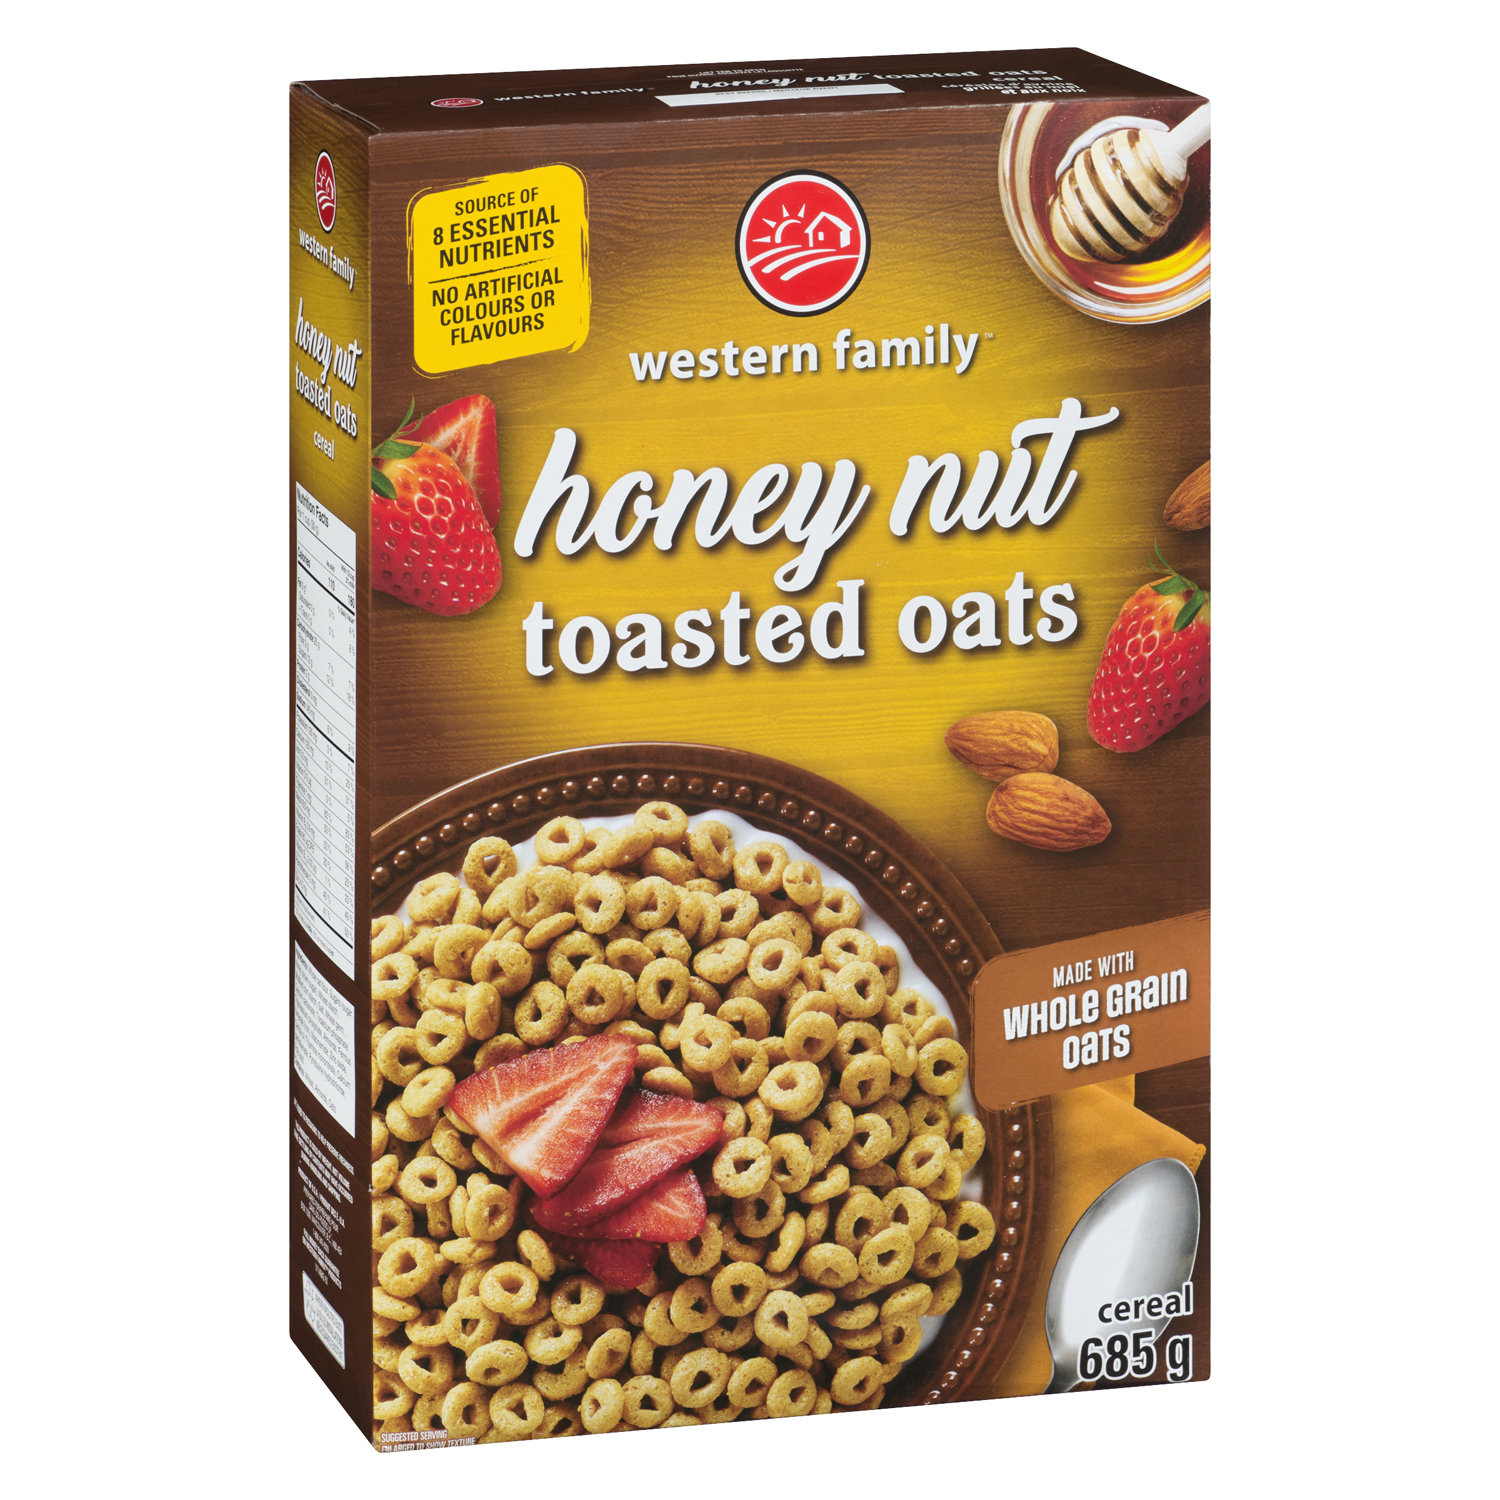 Western Family - Cereal, Honey Nut Toasted Oats - Save-On-Foods